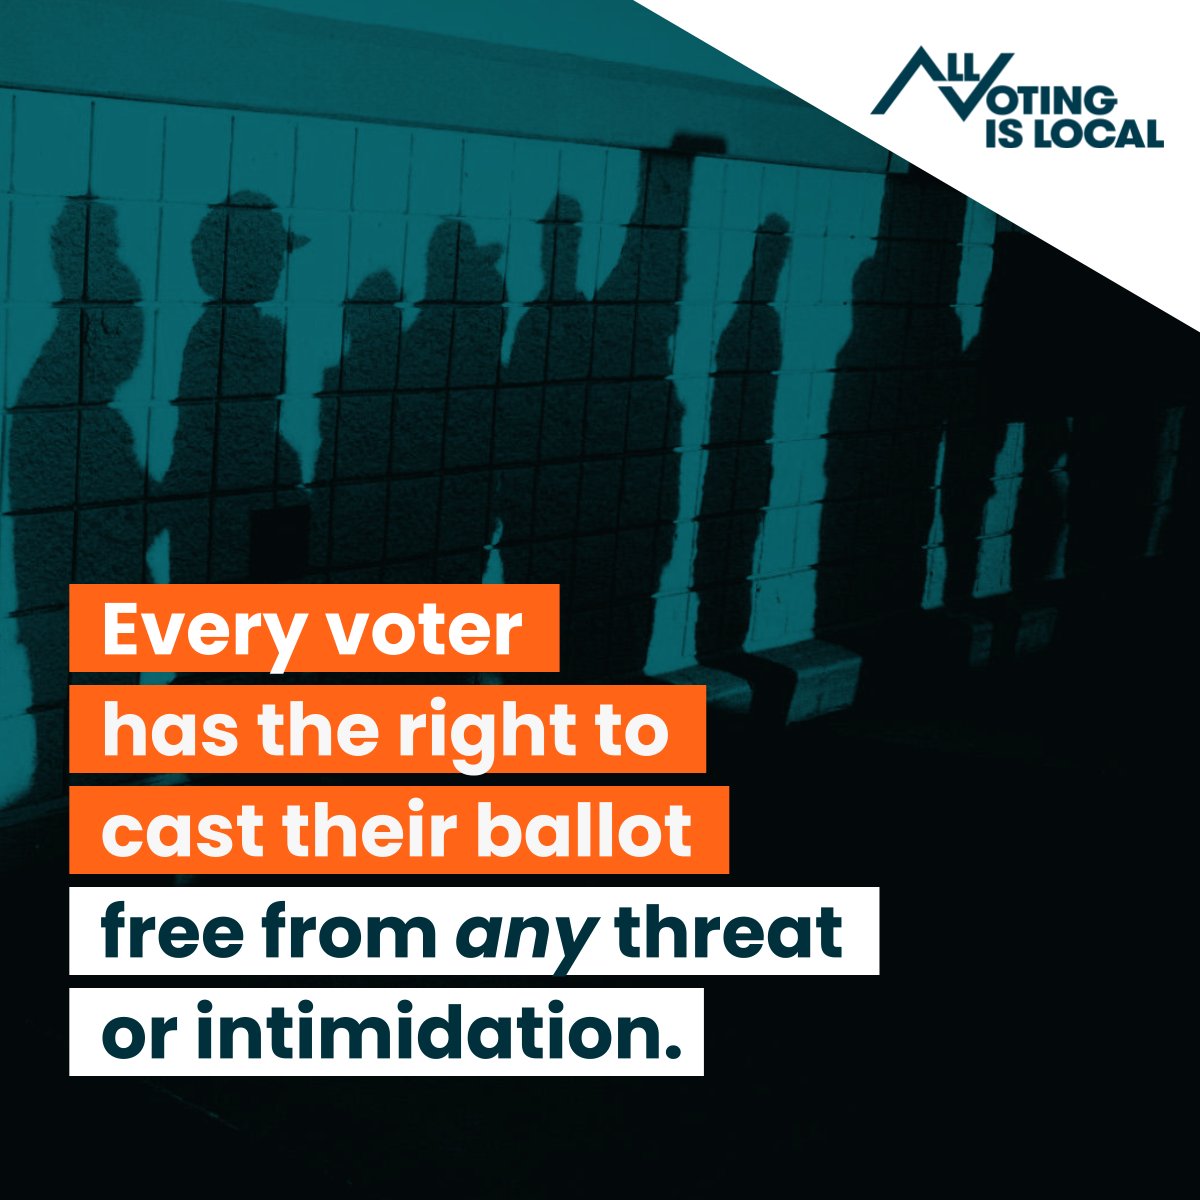 What do you do if someone brings a gun to a polling place? If poll workers feel threatened while doing their jobs? Alongside @brennancenter, we answer these questions and more in new guides on stopping voter and election official intimidation: allvoting.org/leoguidelines